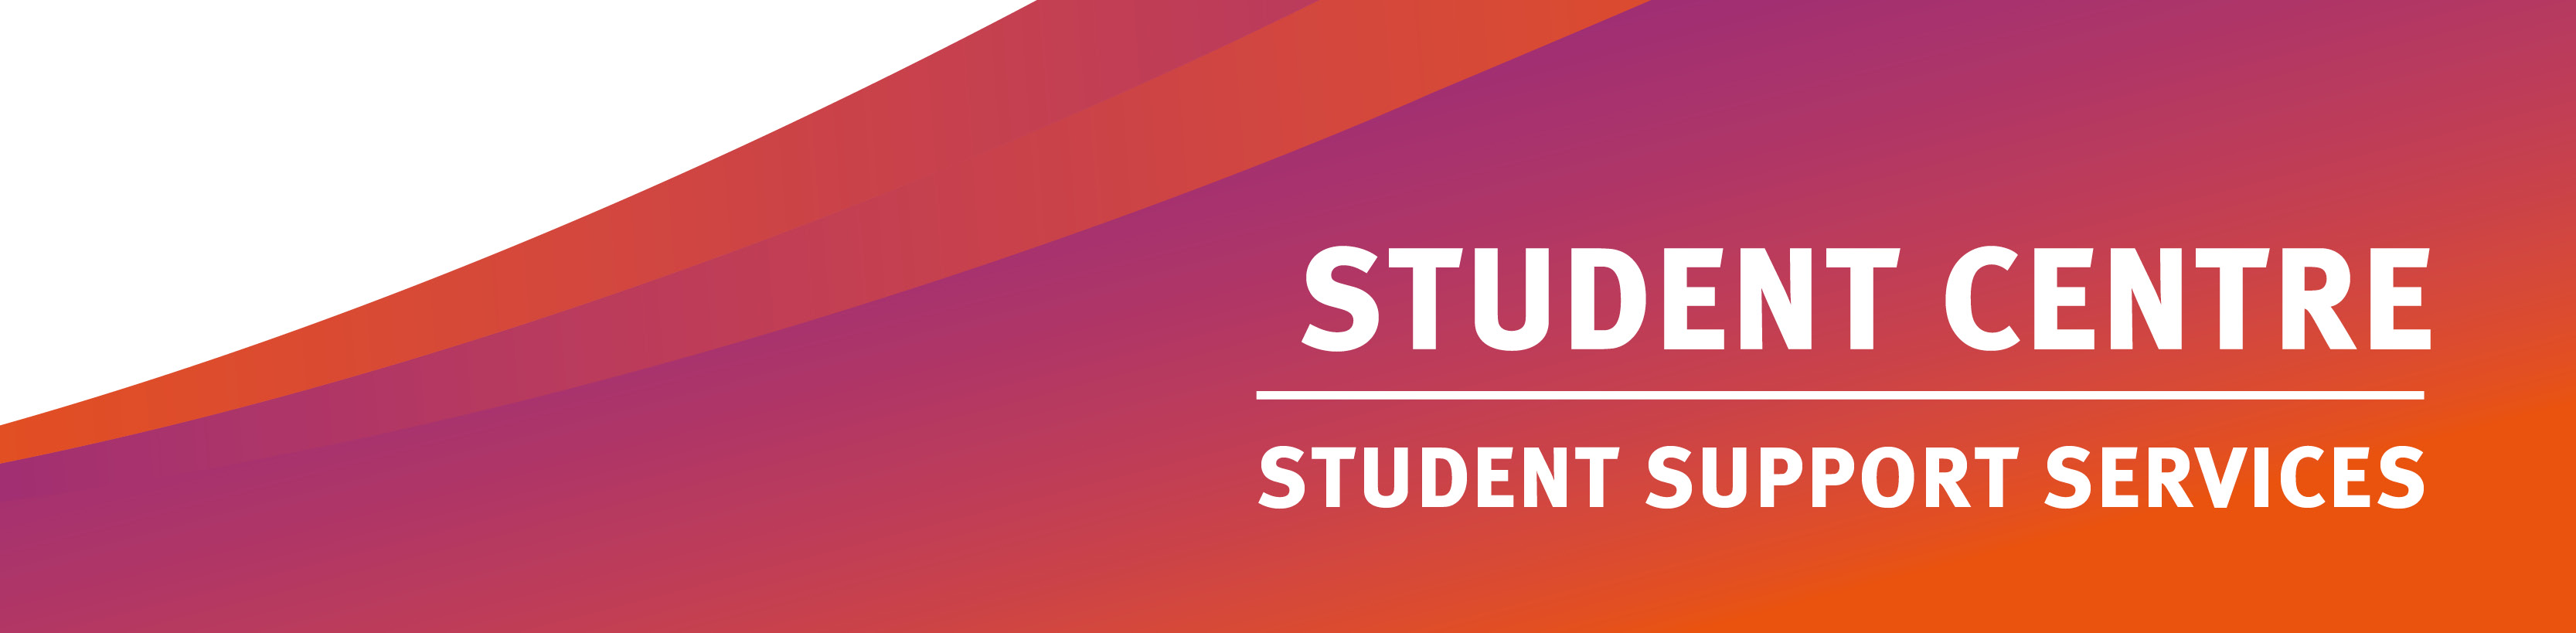 Student Centre - Student Support Services